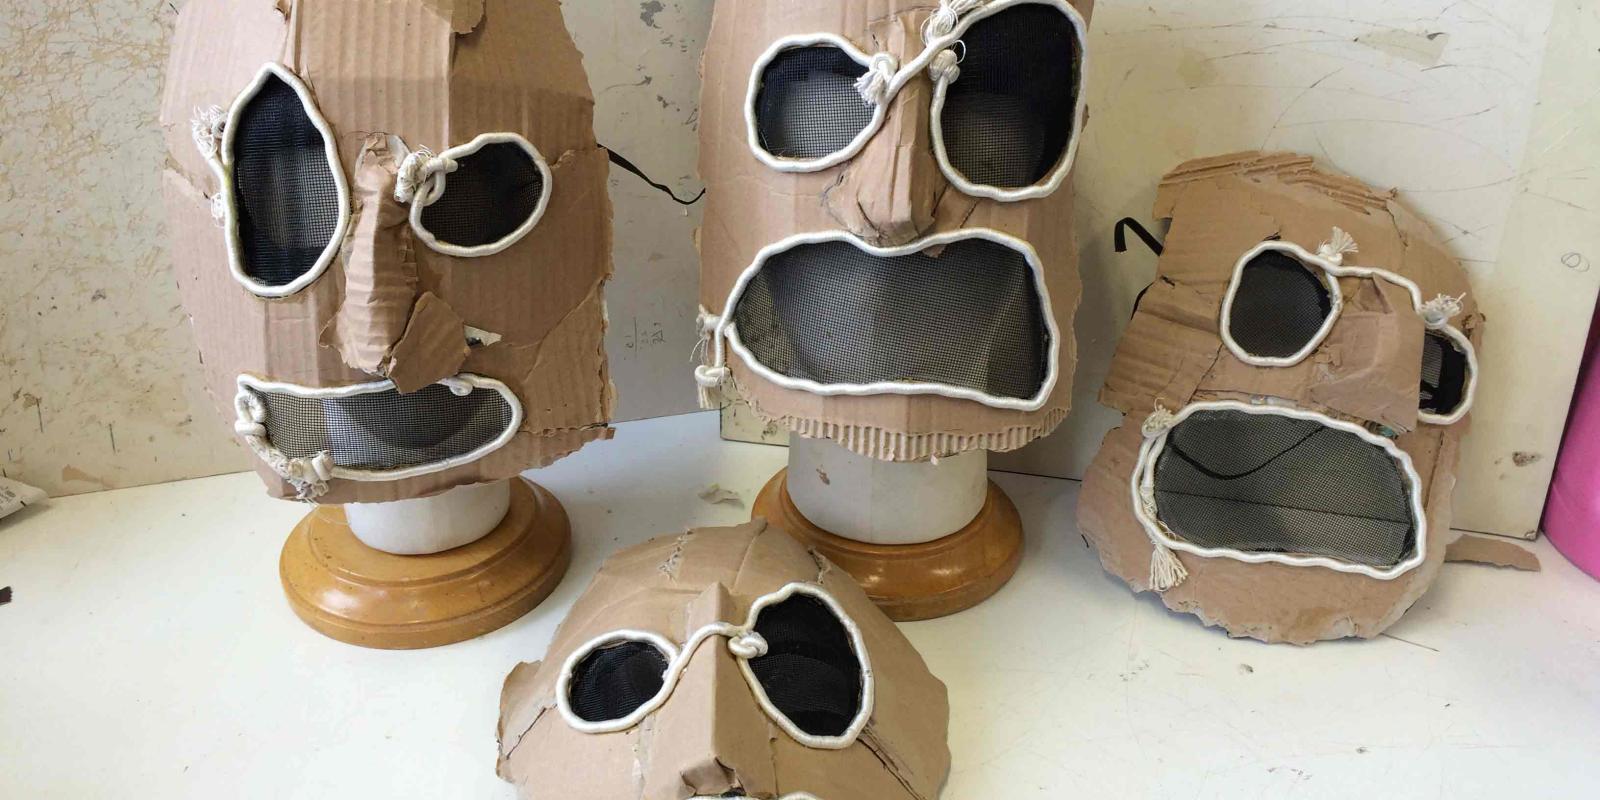 A row of cardboard masks for Don Giovanni